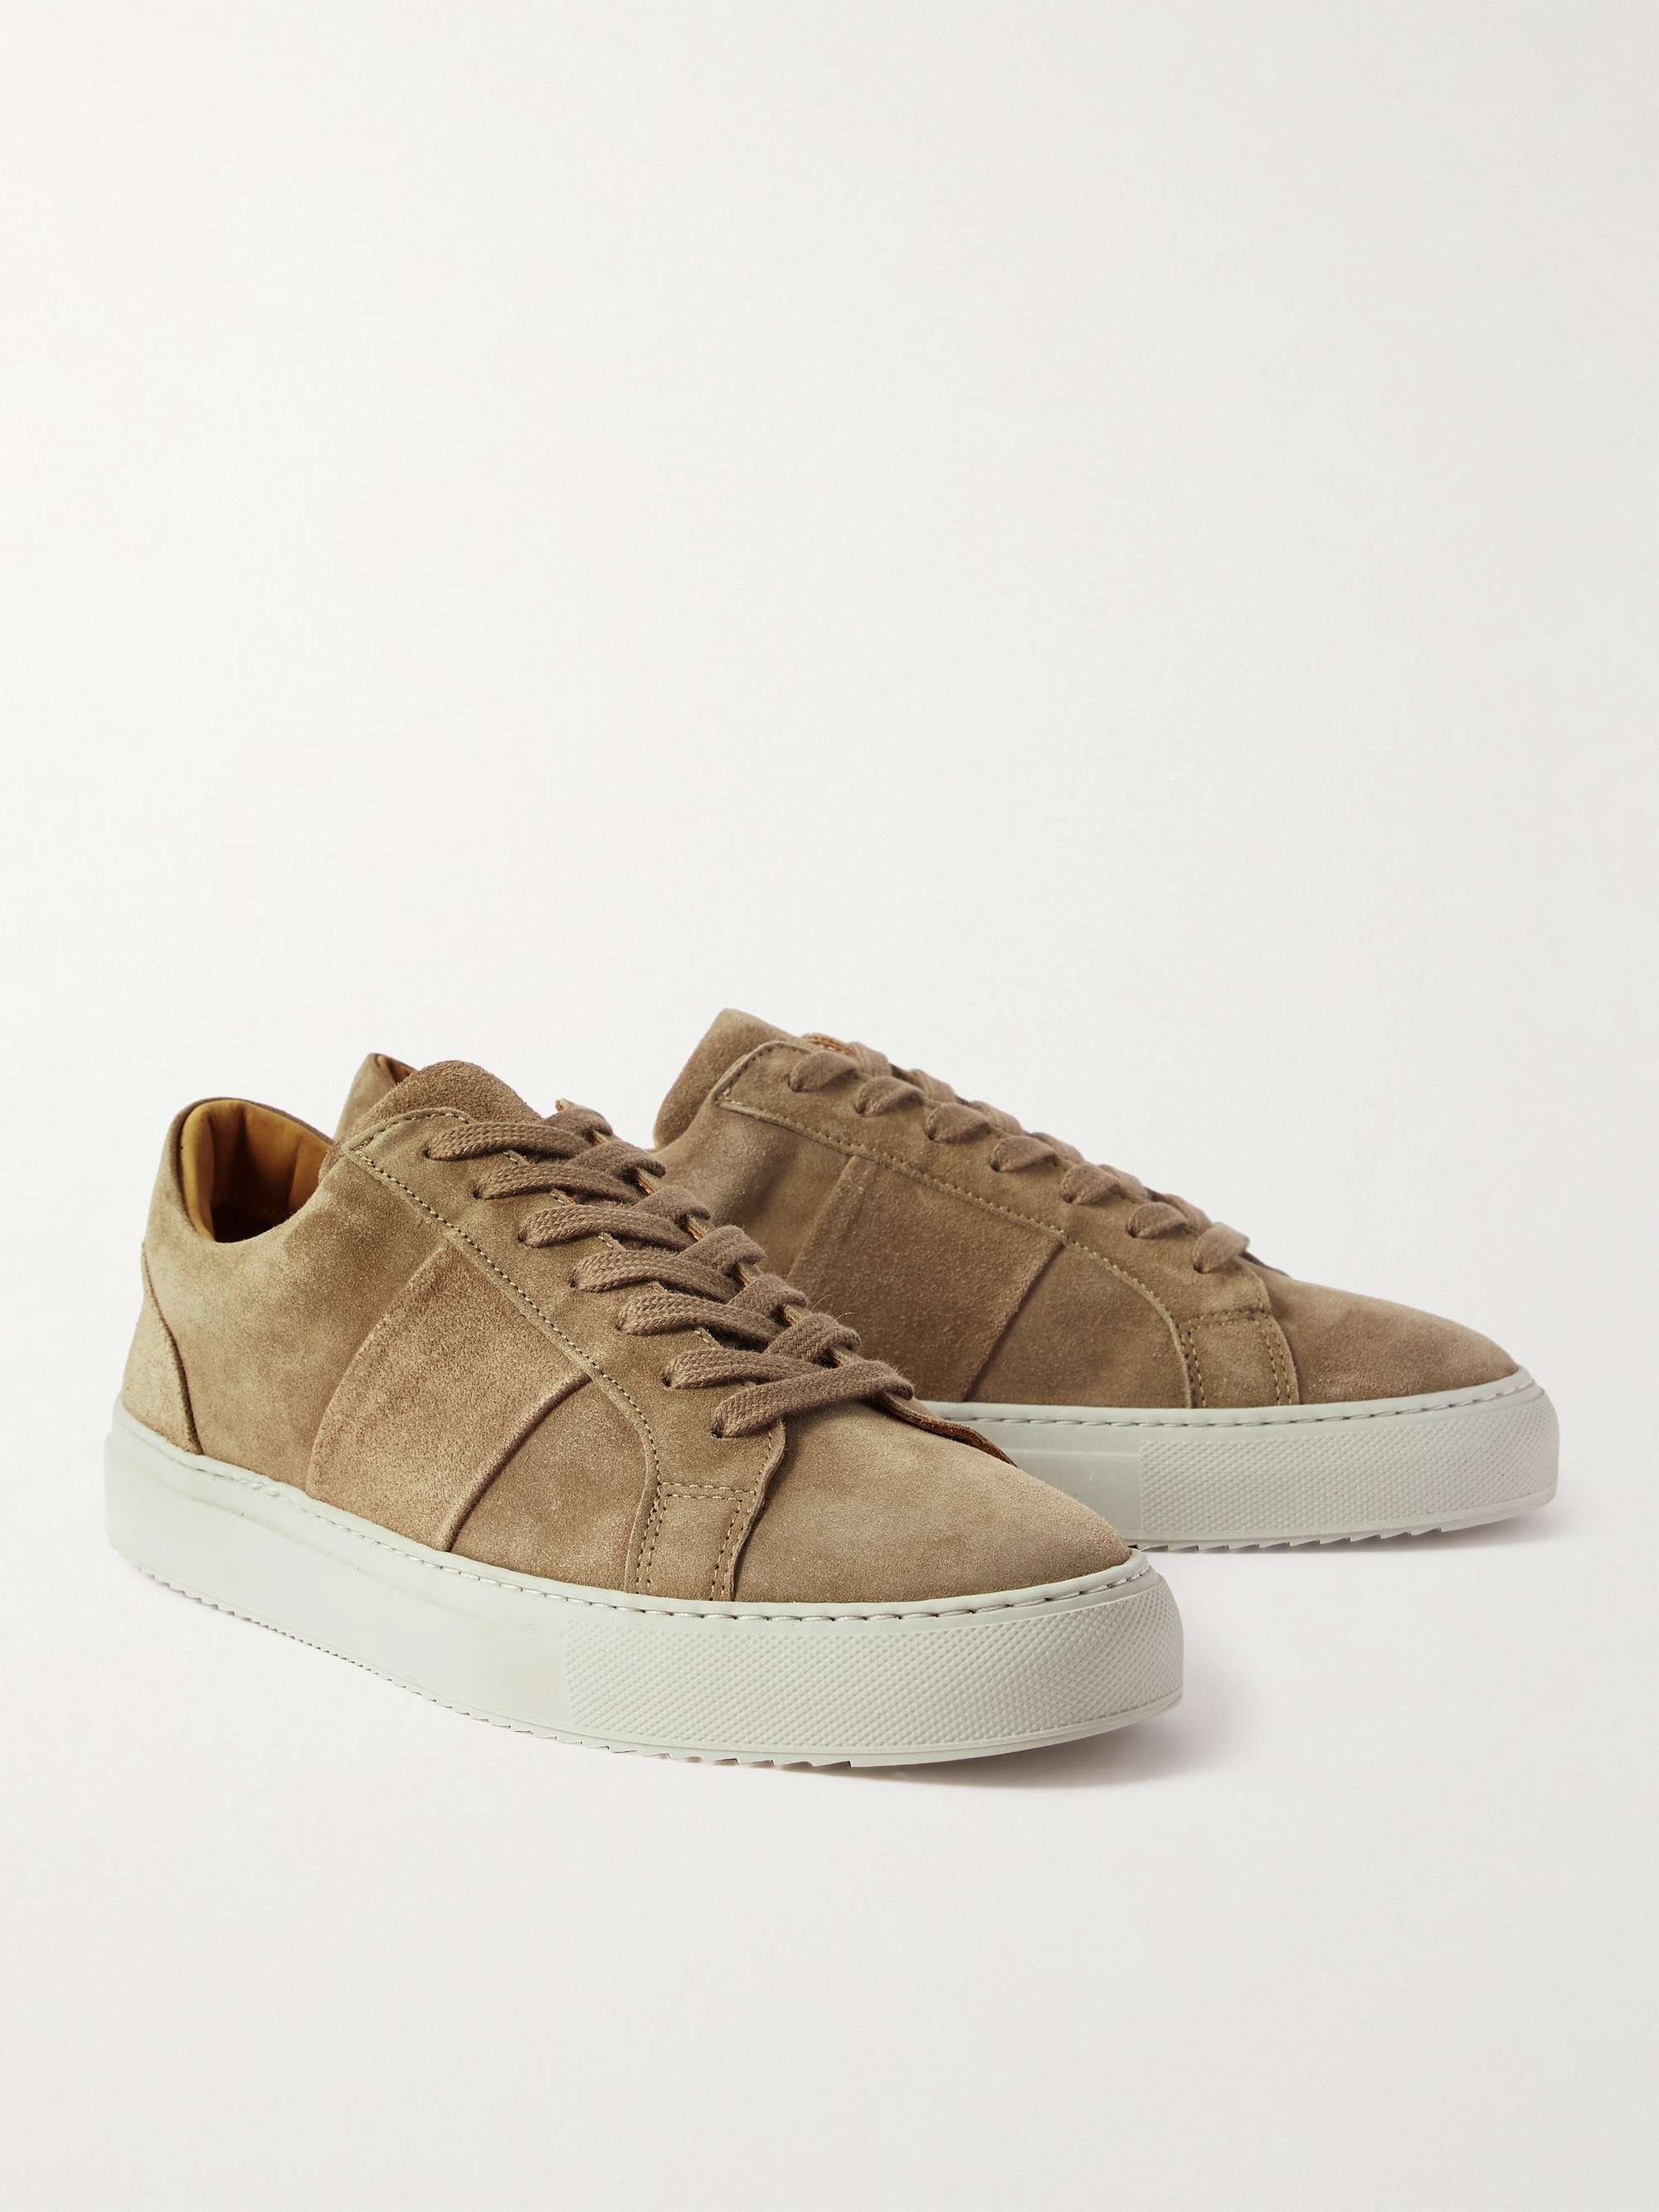 MR P. Larry Leather Sneakers